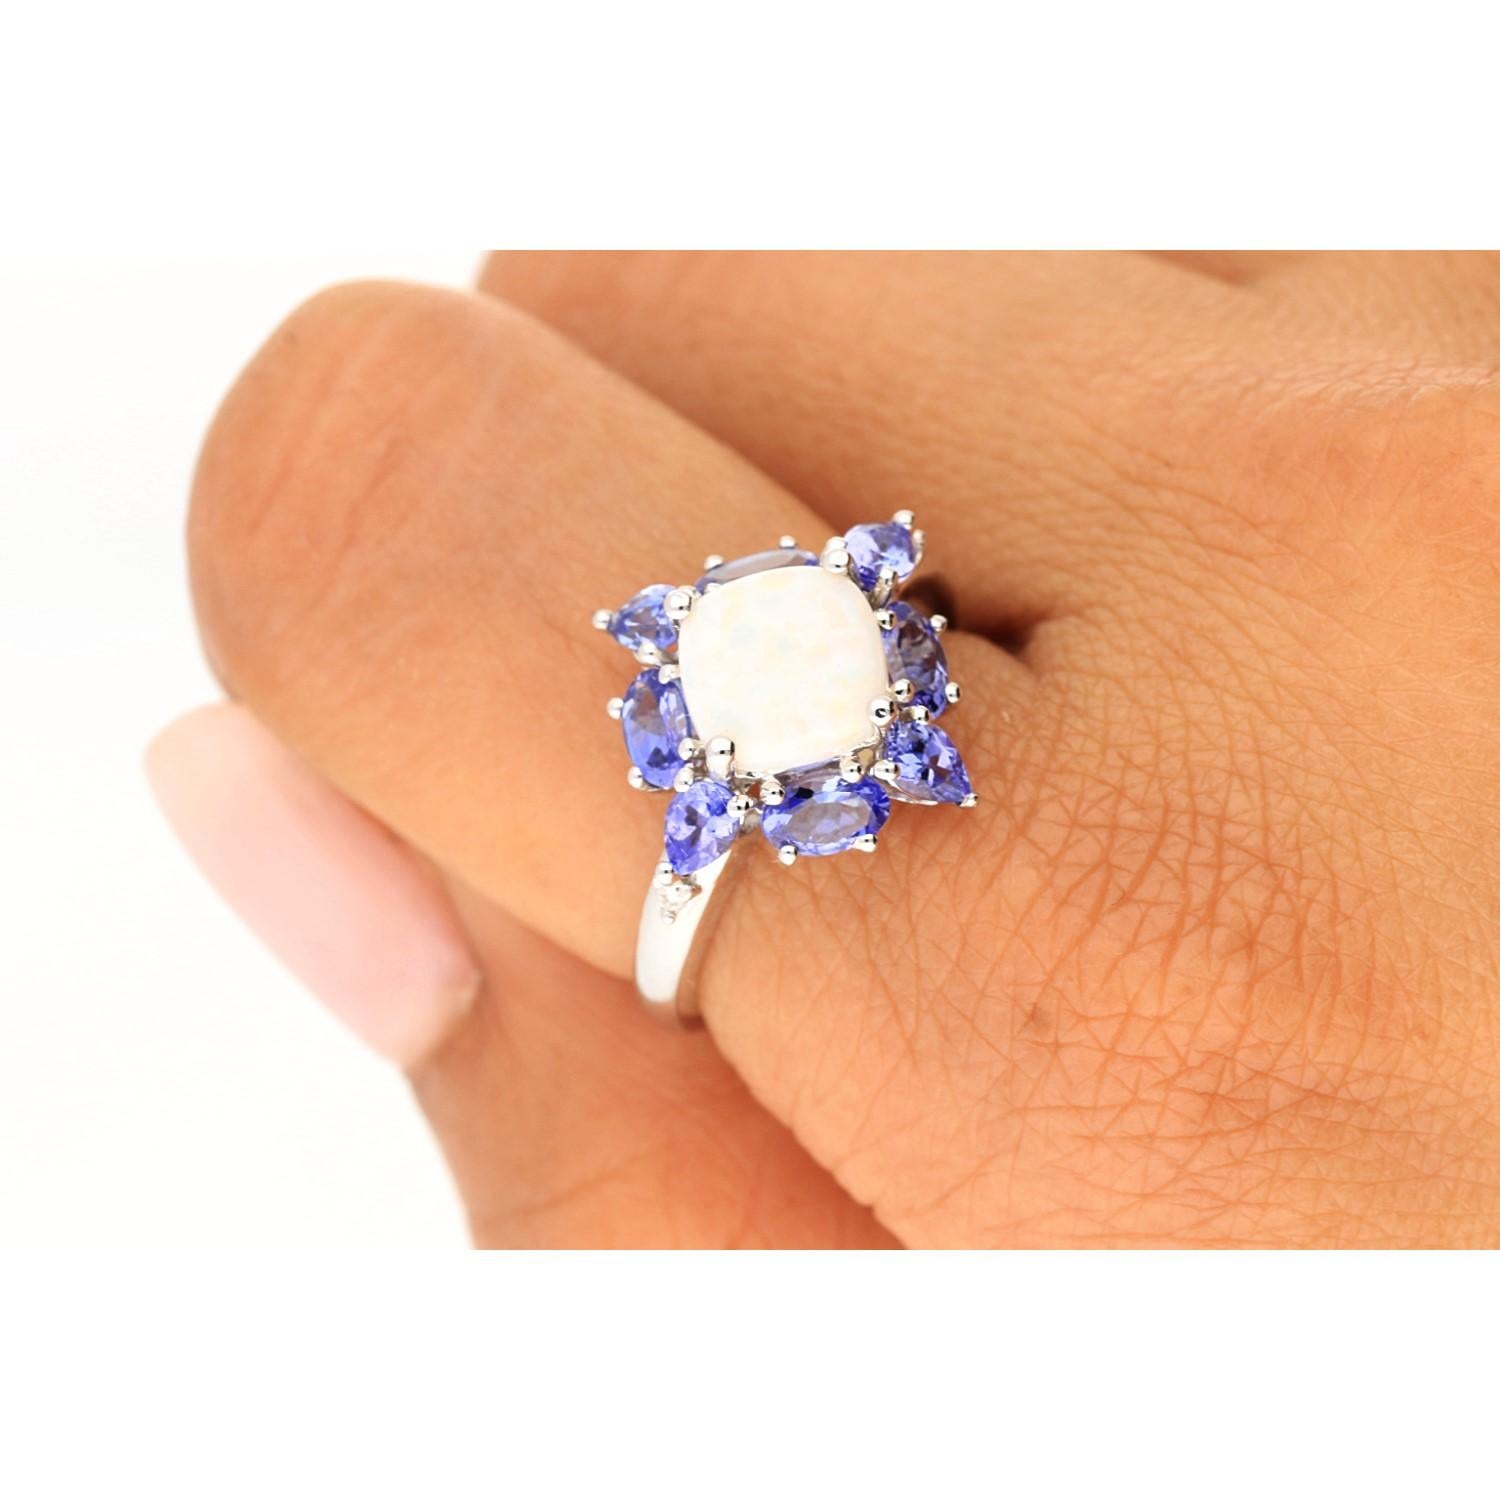 Stunning, timeless and classy eternity Unique Ring. Decorate yourself in luxury with this Gin & Grace Ring. The 14K White Gold jewelry boasts with Oval-cab Ethiopian Opal 1 pcs 1.63 carat, Tanzanite 8 pcs 1.55 carat, Natural Round-cut white Diamond